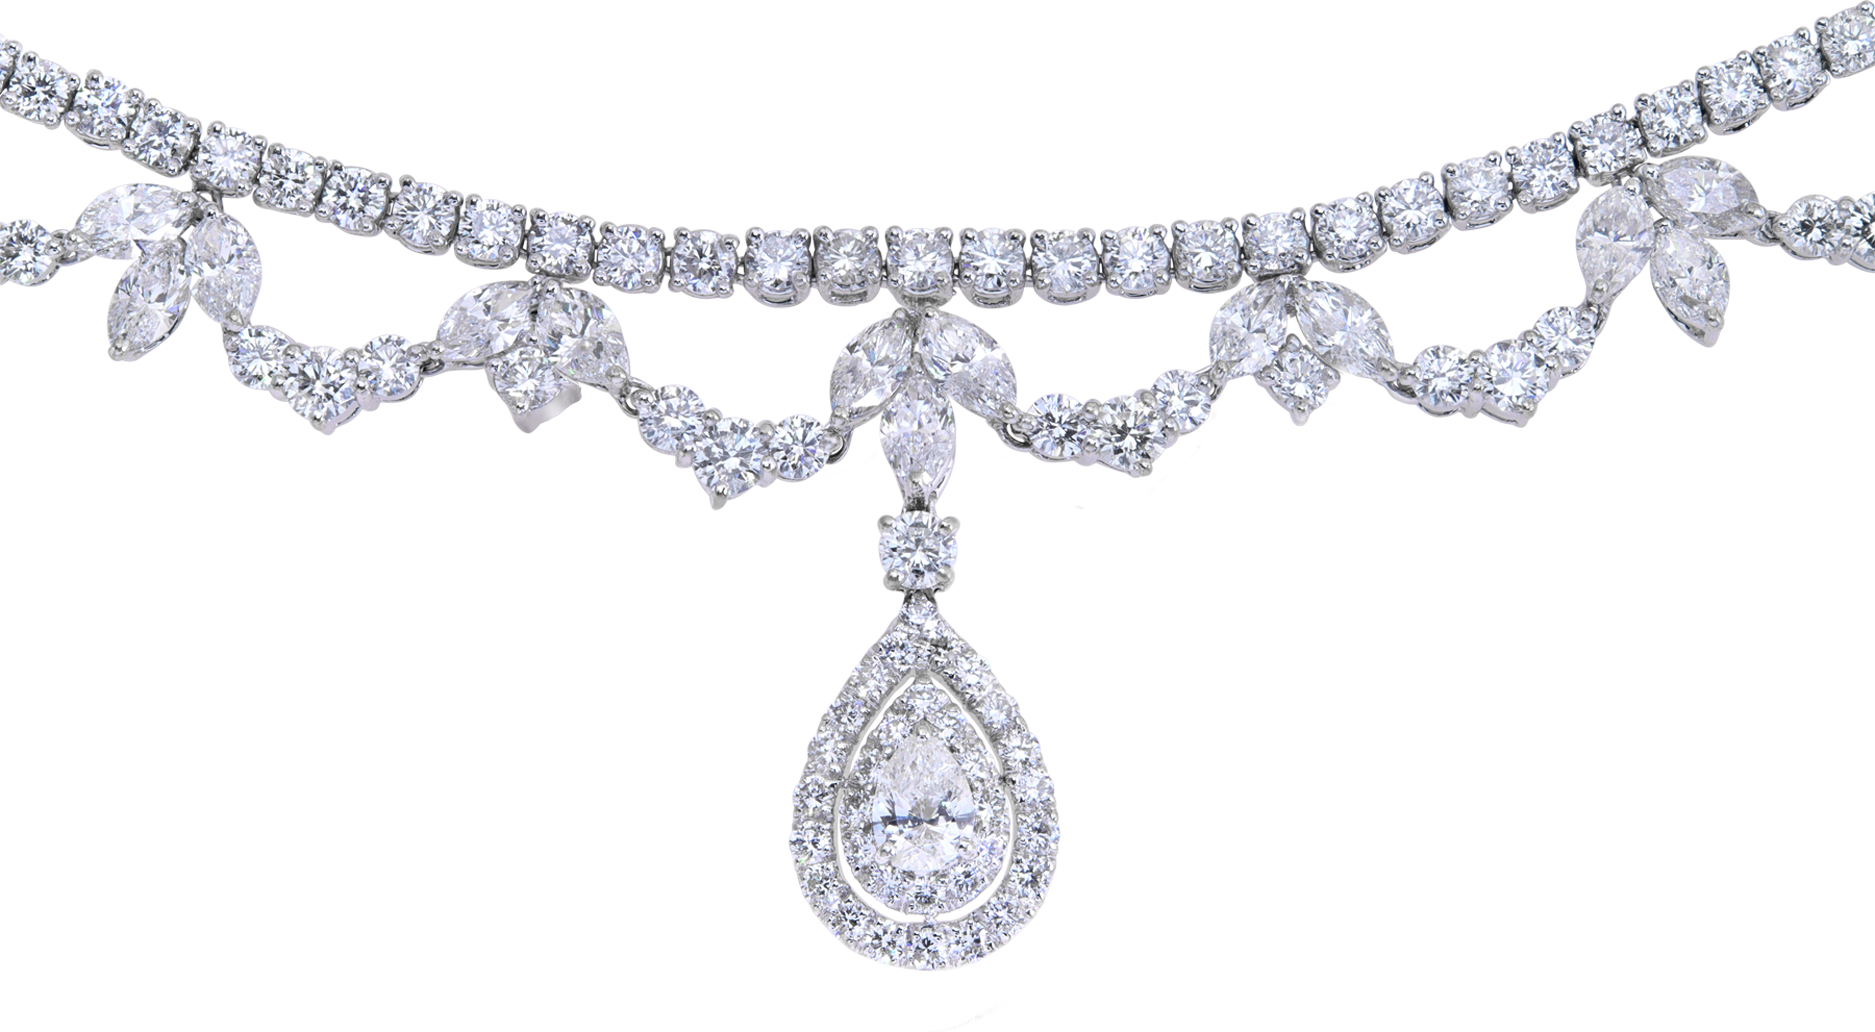 Collerette Diamond Necklace In 18k White Gold. Round, Pear, Marquise, Brilliant Diamonds Total Approx. Weight: 30.5 Carats